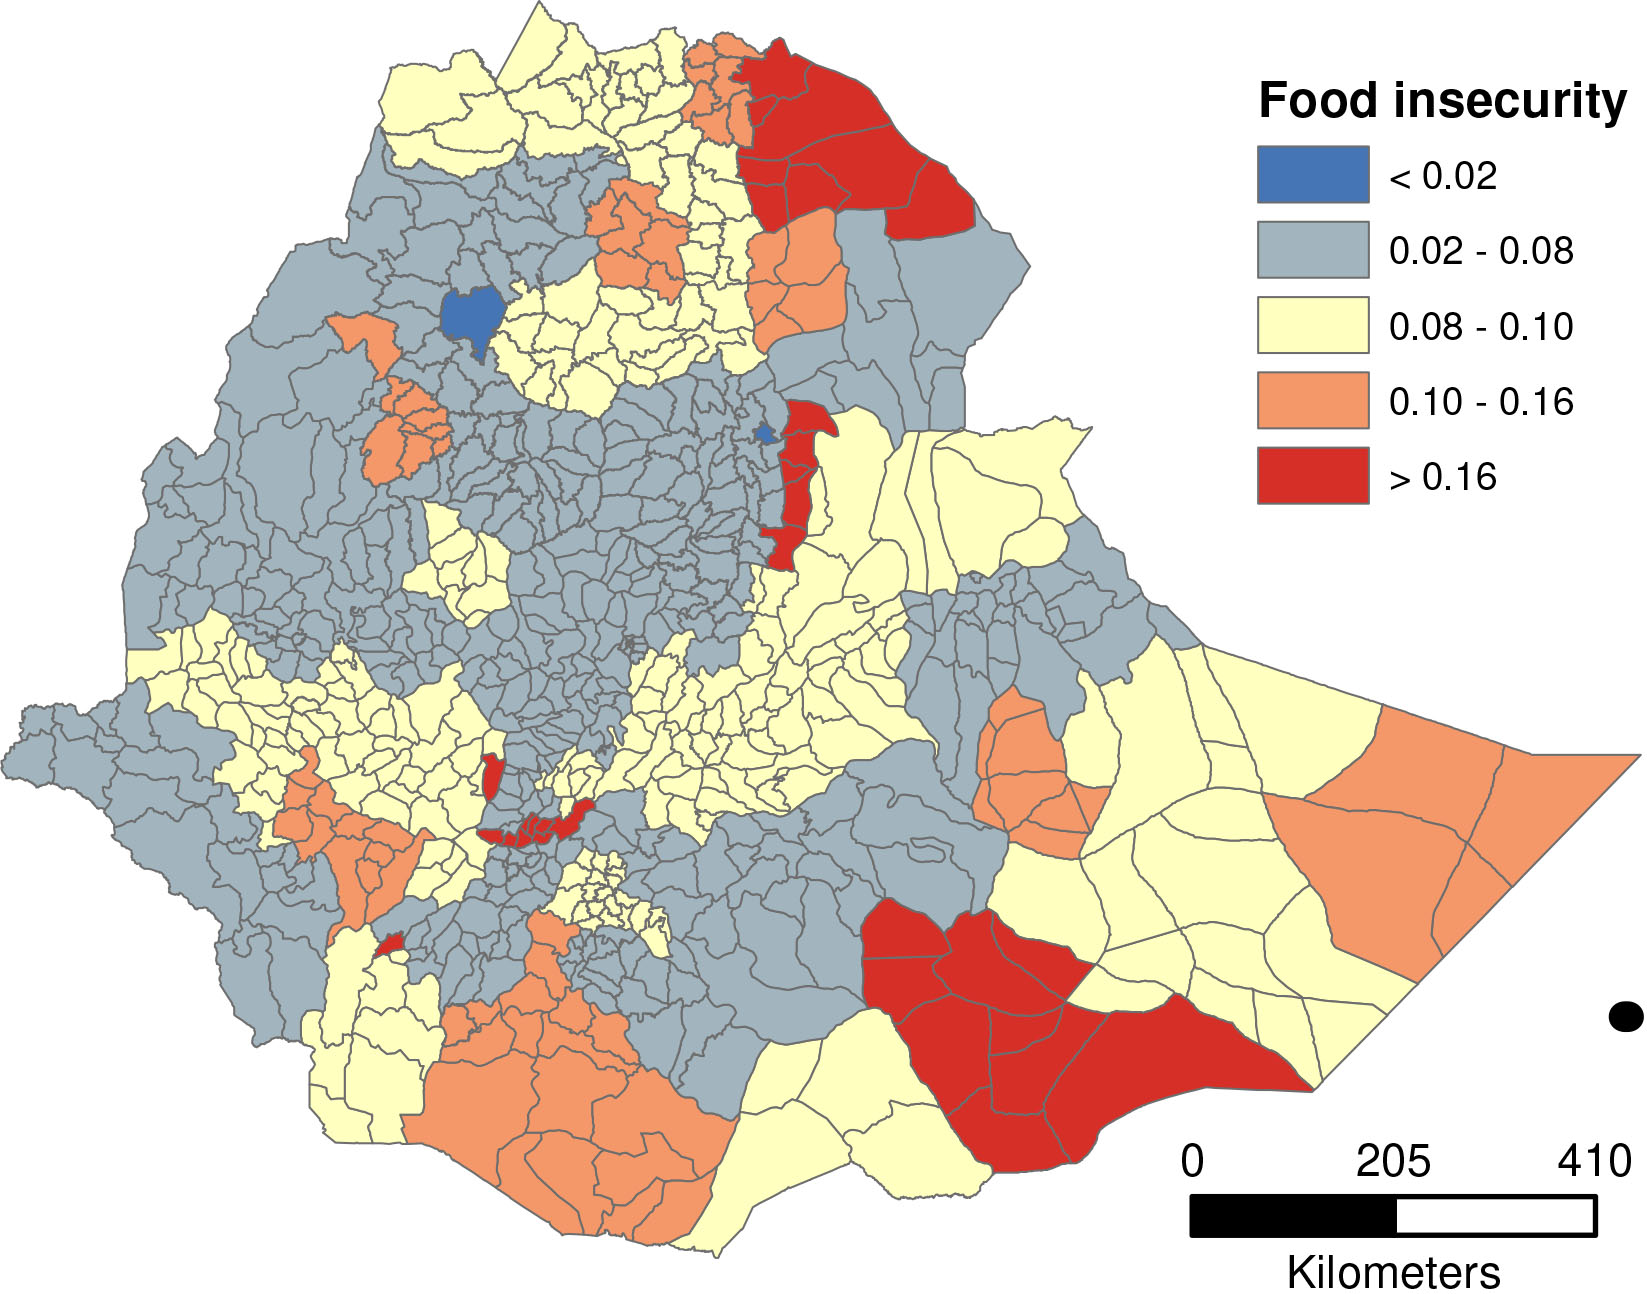 A map of Ethiopia showing zonal level food insecurity estimates.